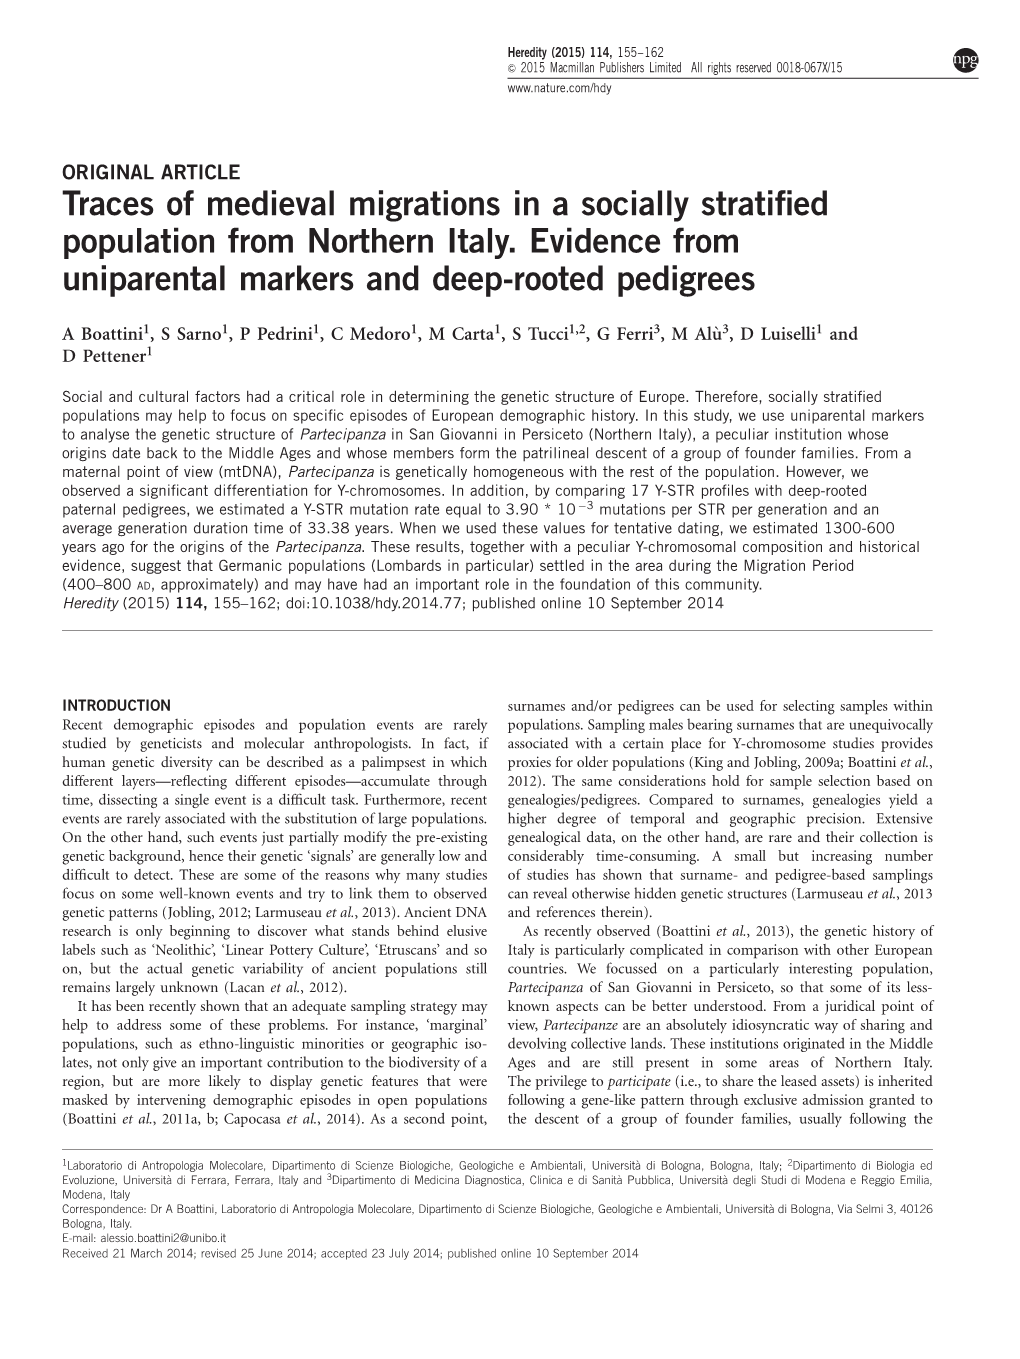 Traces of Medieval Migrations in a Socially Stratified Population From